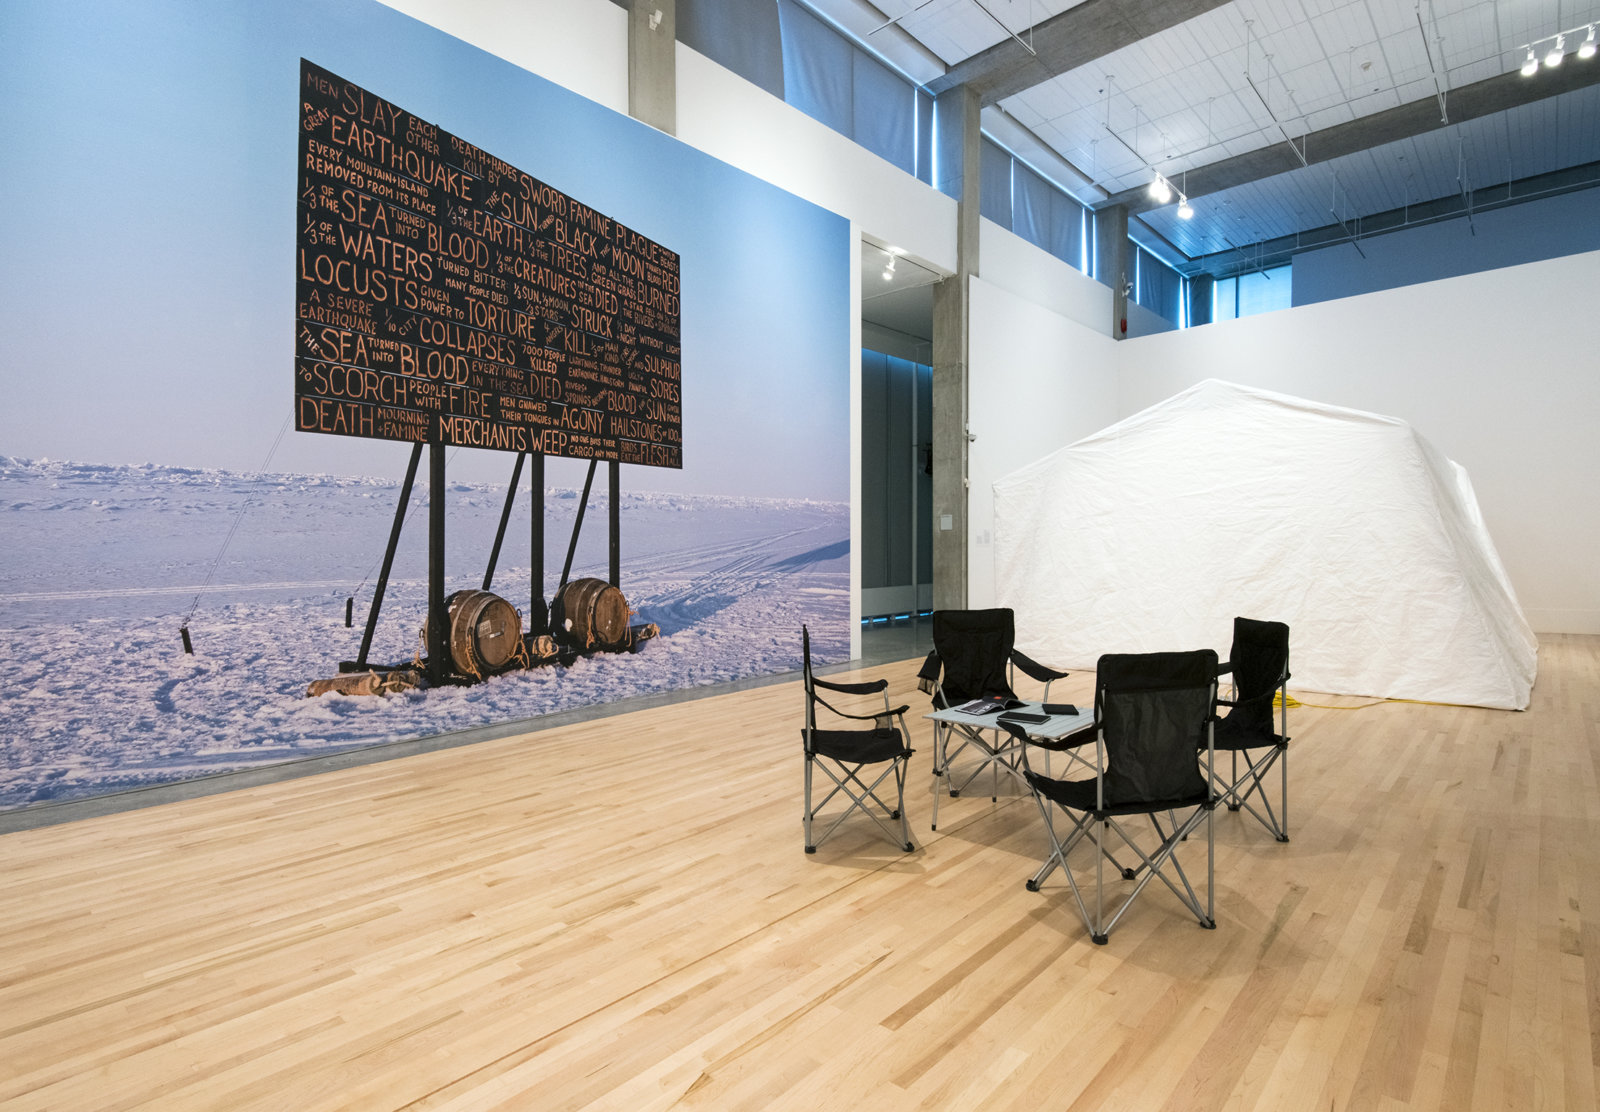 Kevin Schmidt, A Sign in the Northwest Passage (Billboard Mural), 2011, digital photo, dimensions variable. Installation view, The Commons, Kamloops Art Gallery, Kamloops, Canada, 2015